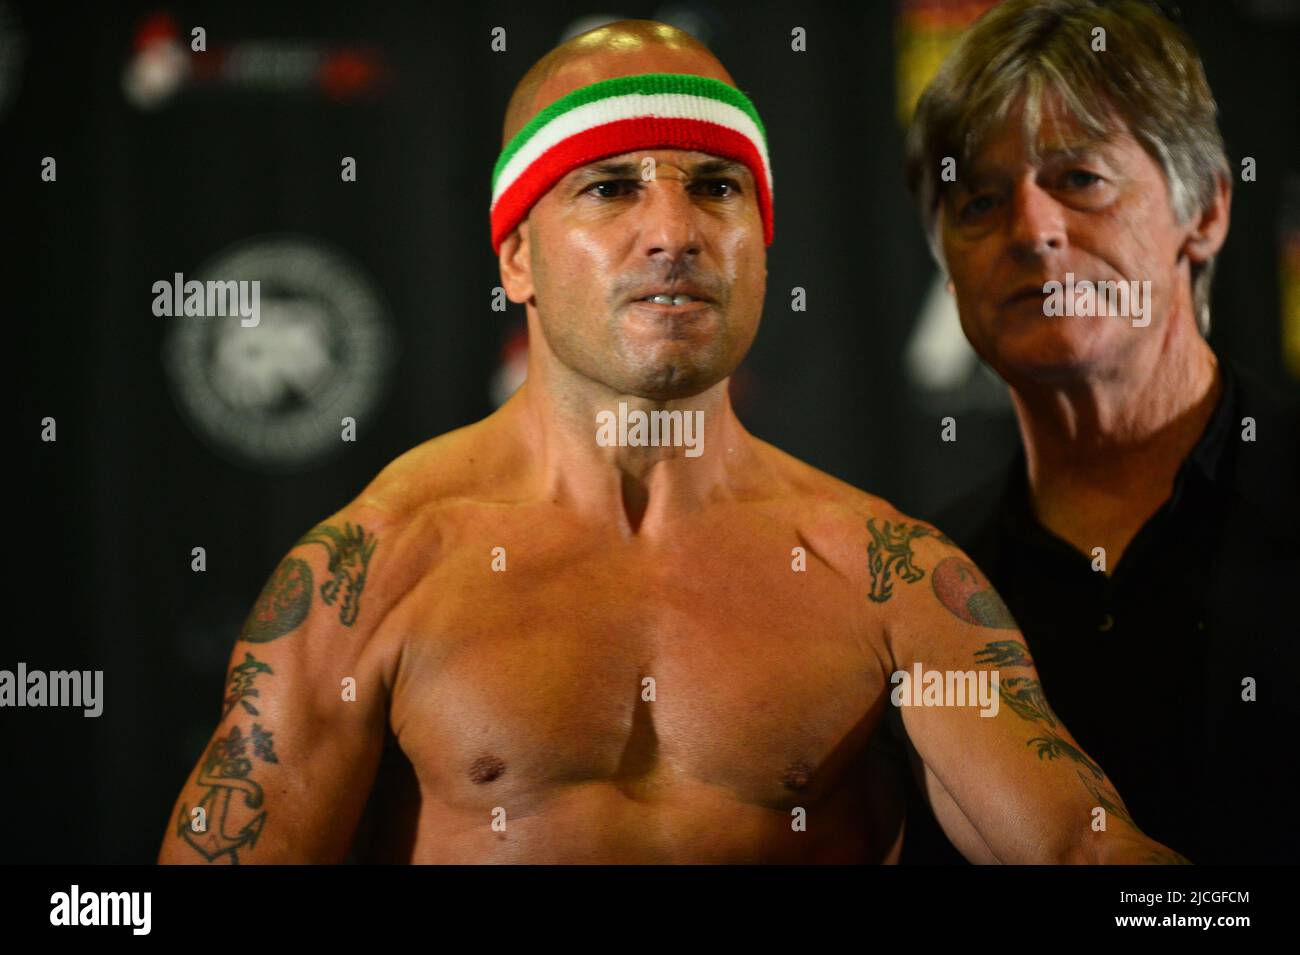 PEMBROKE PINES, FL - JUNE 10: Mark 'Razor' Rizzott attends Celebrity Boxing Match weigh in at Charles Dodge Center on June 10, 2022 in Pembroke Pines, Florida. (Photo by JL/Sipa USA) Stock Photo